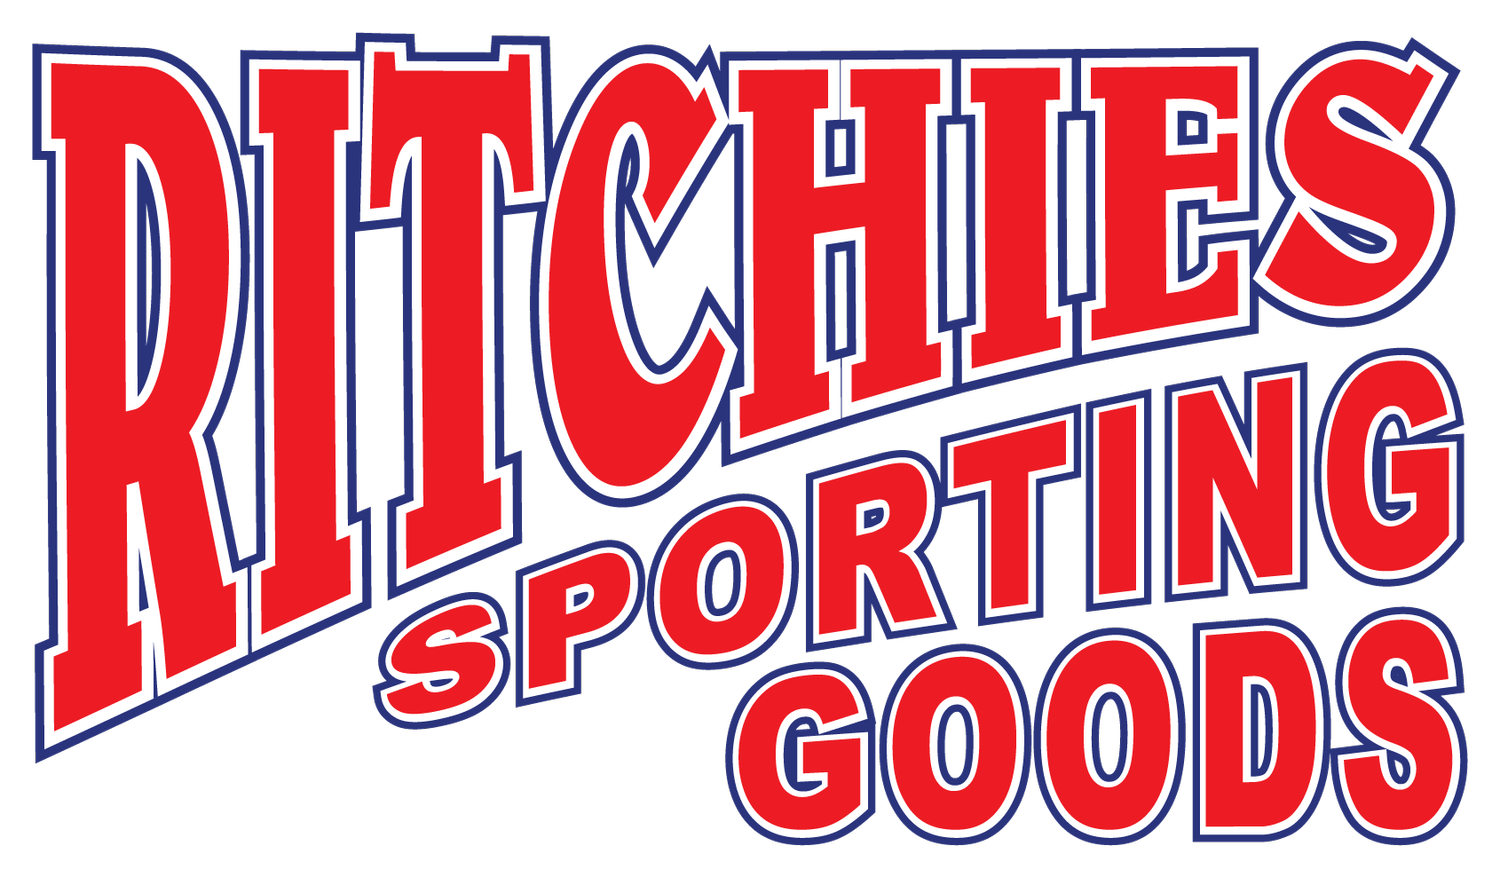 Ritchies Sporting Goods